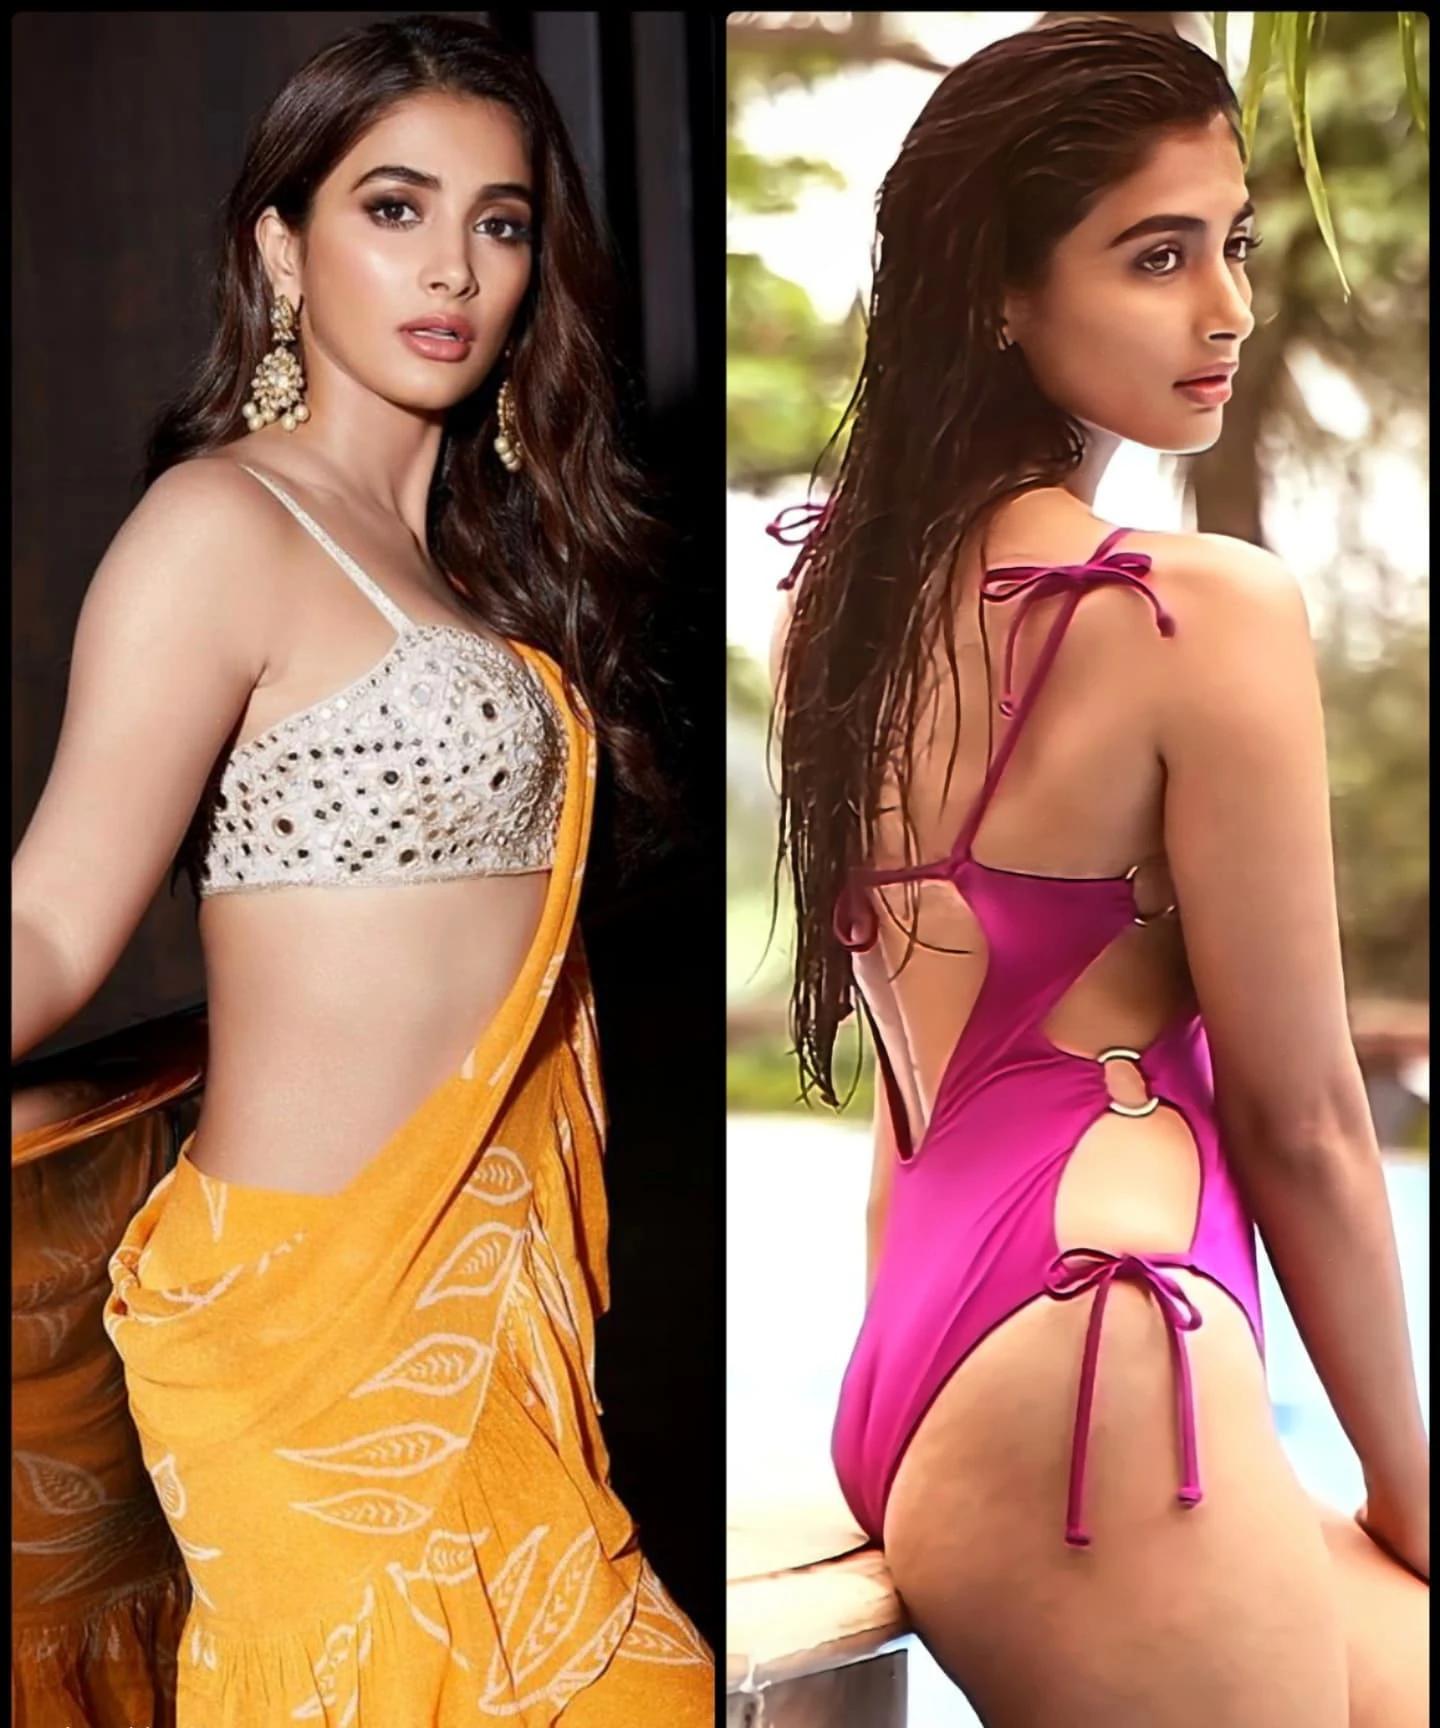 Pooja Hegde hot, Pooja Hegde sexy, Pooja Hegde sexy bikini, Pooja Hegde sexy butt, Pooja Hegde nude, Pooja Hegde hot boobs and clevege Show